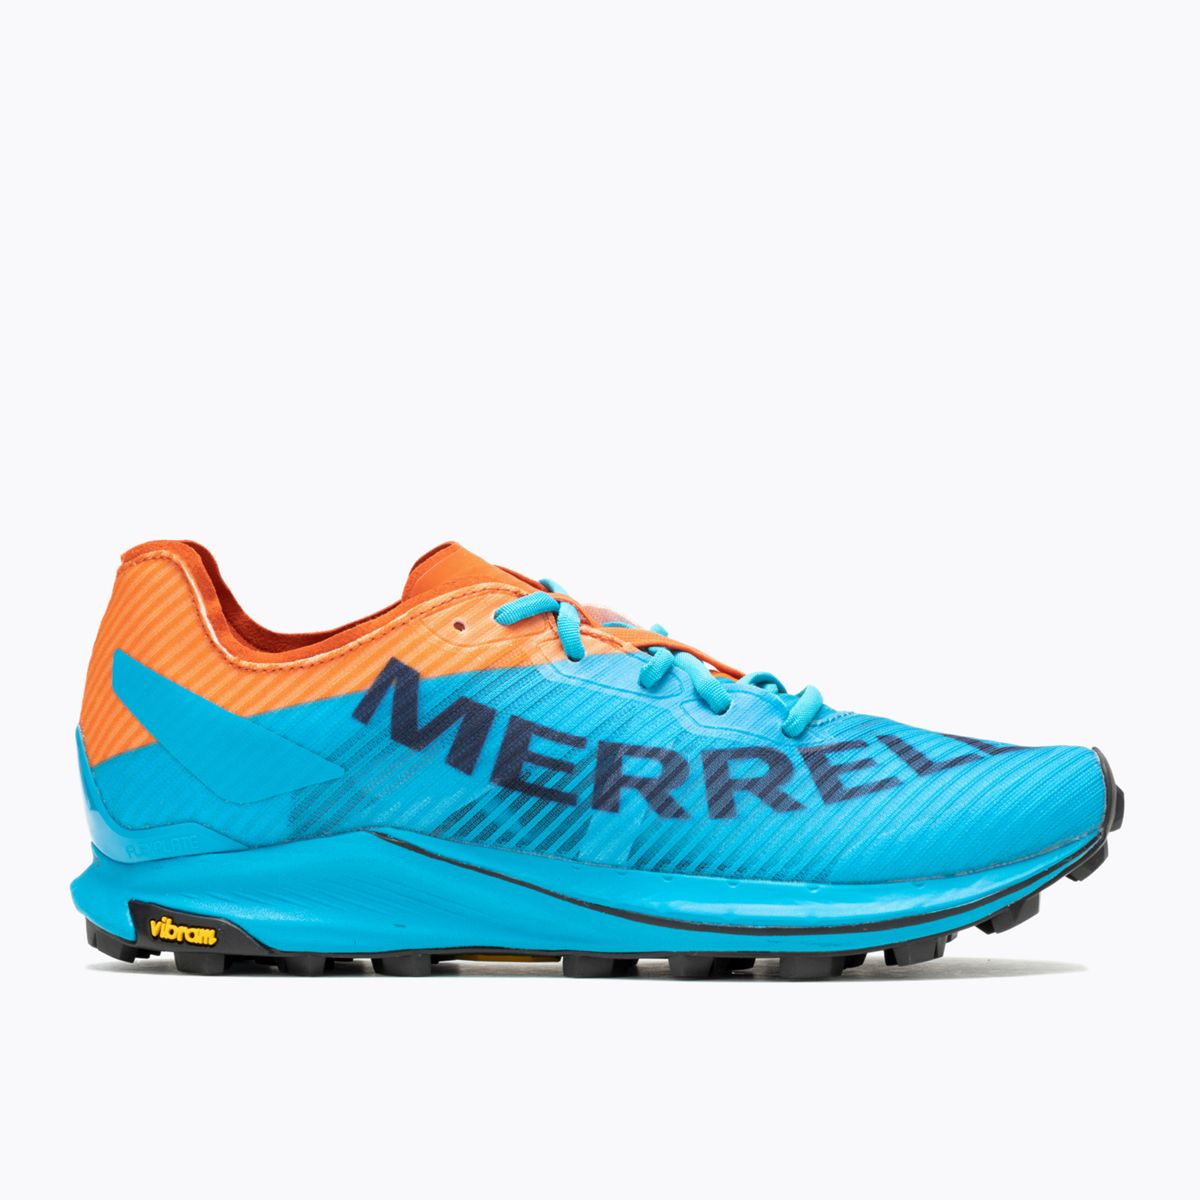 Color Stories - Sunset Skies Collection | Merrell